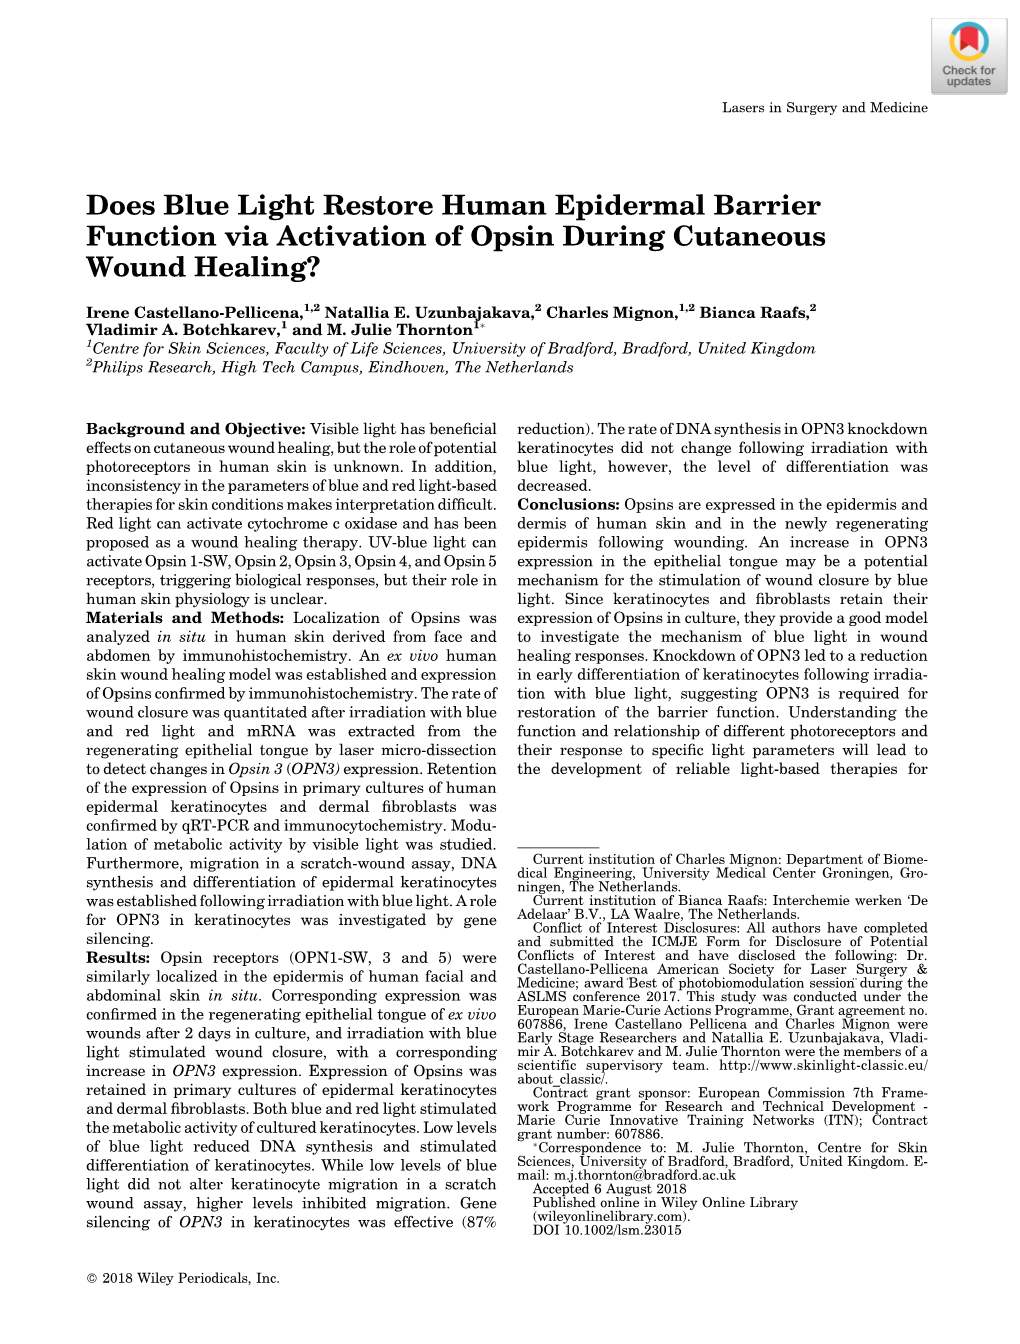 Does Blue Light Restore Human Epidermal Barrier Function Via Activation of Opsin During Cutaneous Wound Healing?